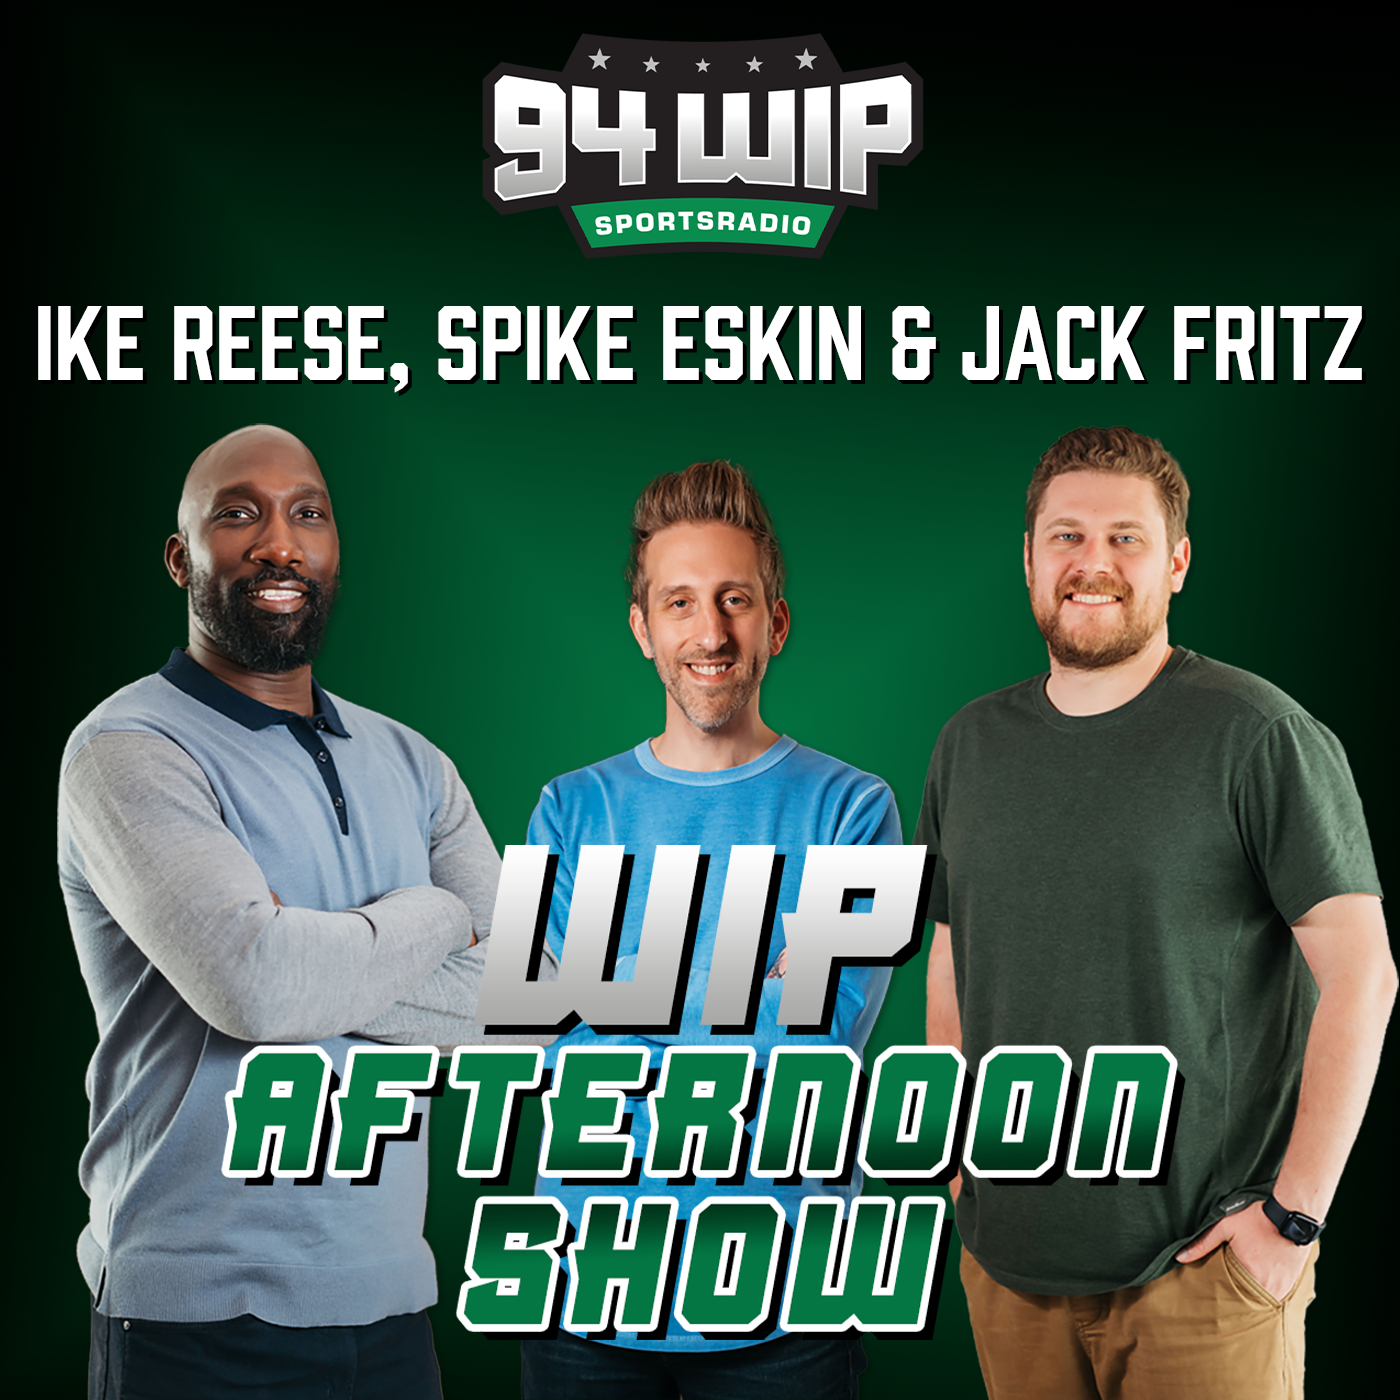 Hour 4: Top 5 at 5 with Jack Fritz - 94WIP Jon Marks & Ike Reese 